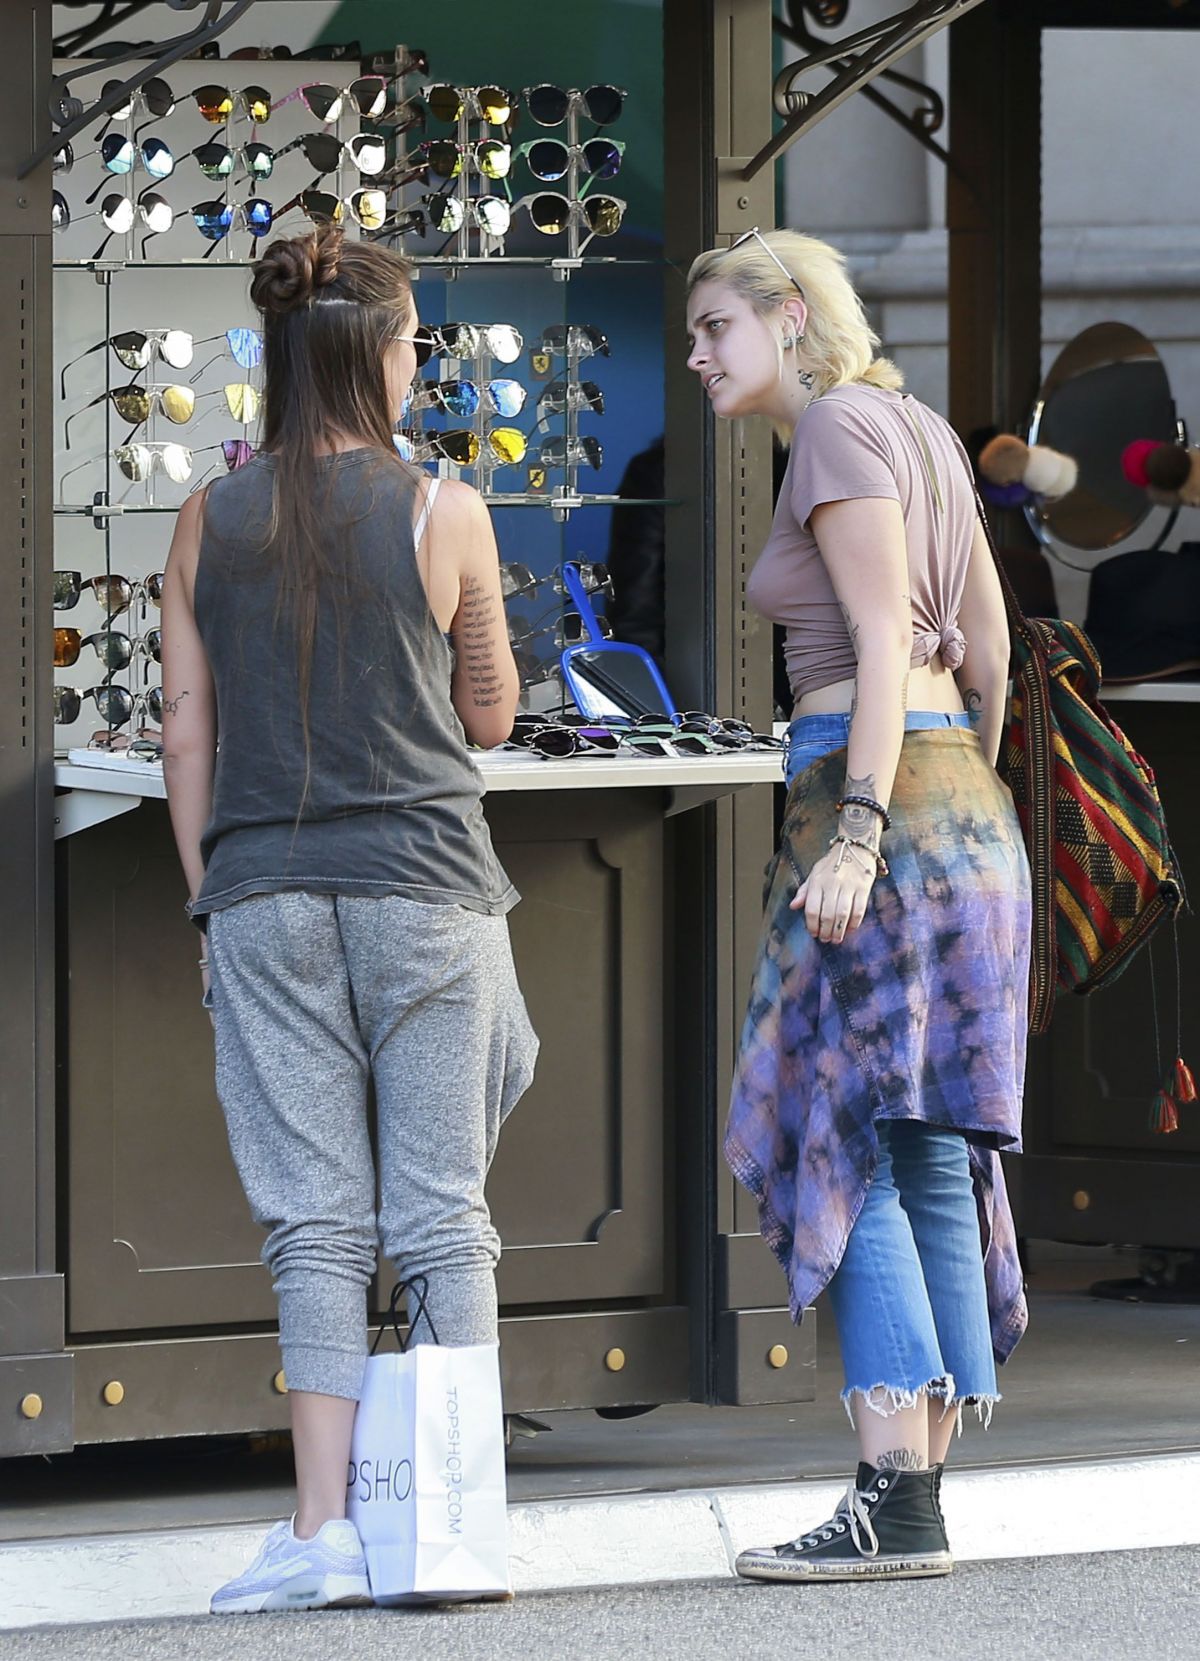 paris-jackson-out-shopping-in-los-angeles-02-15-2017_18.jpg